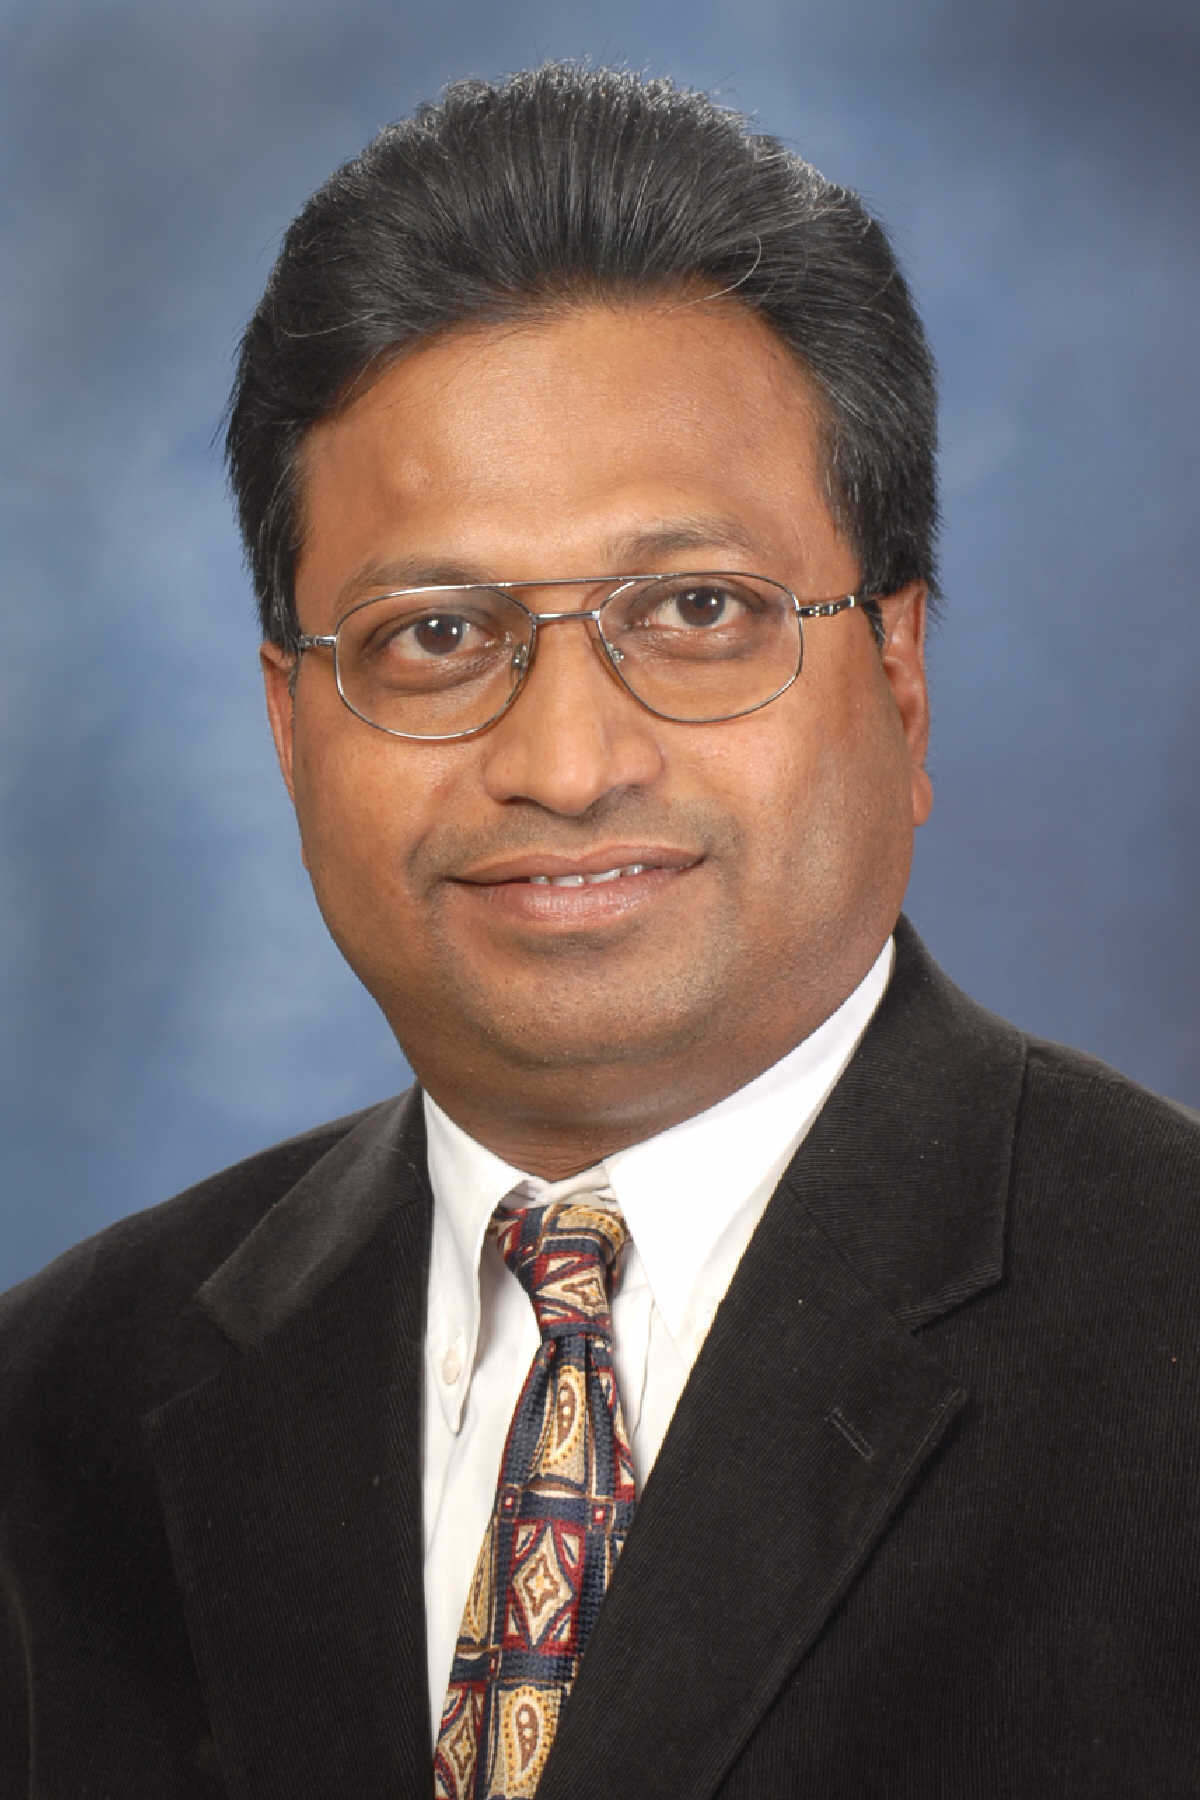 Praveen Katta, a prominent broker in the Louisville, Kentucky real estate market, stands confidently in a professional photograph.